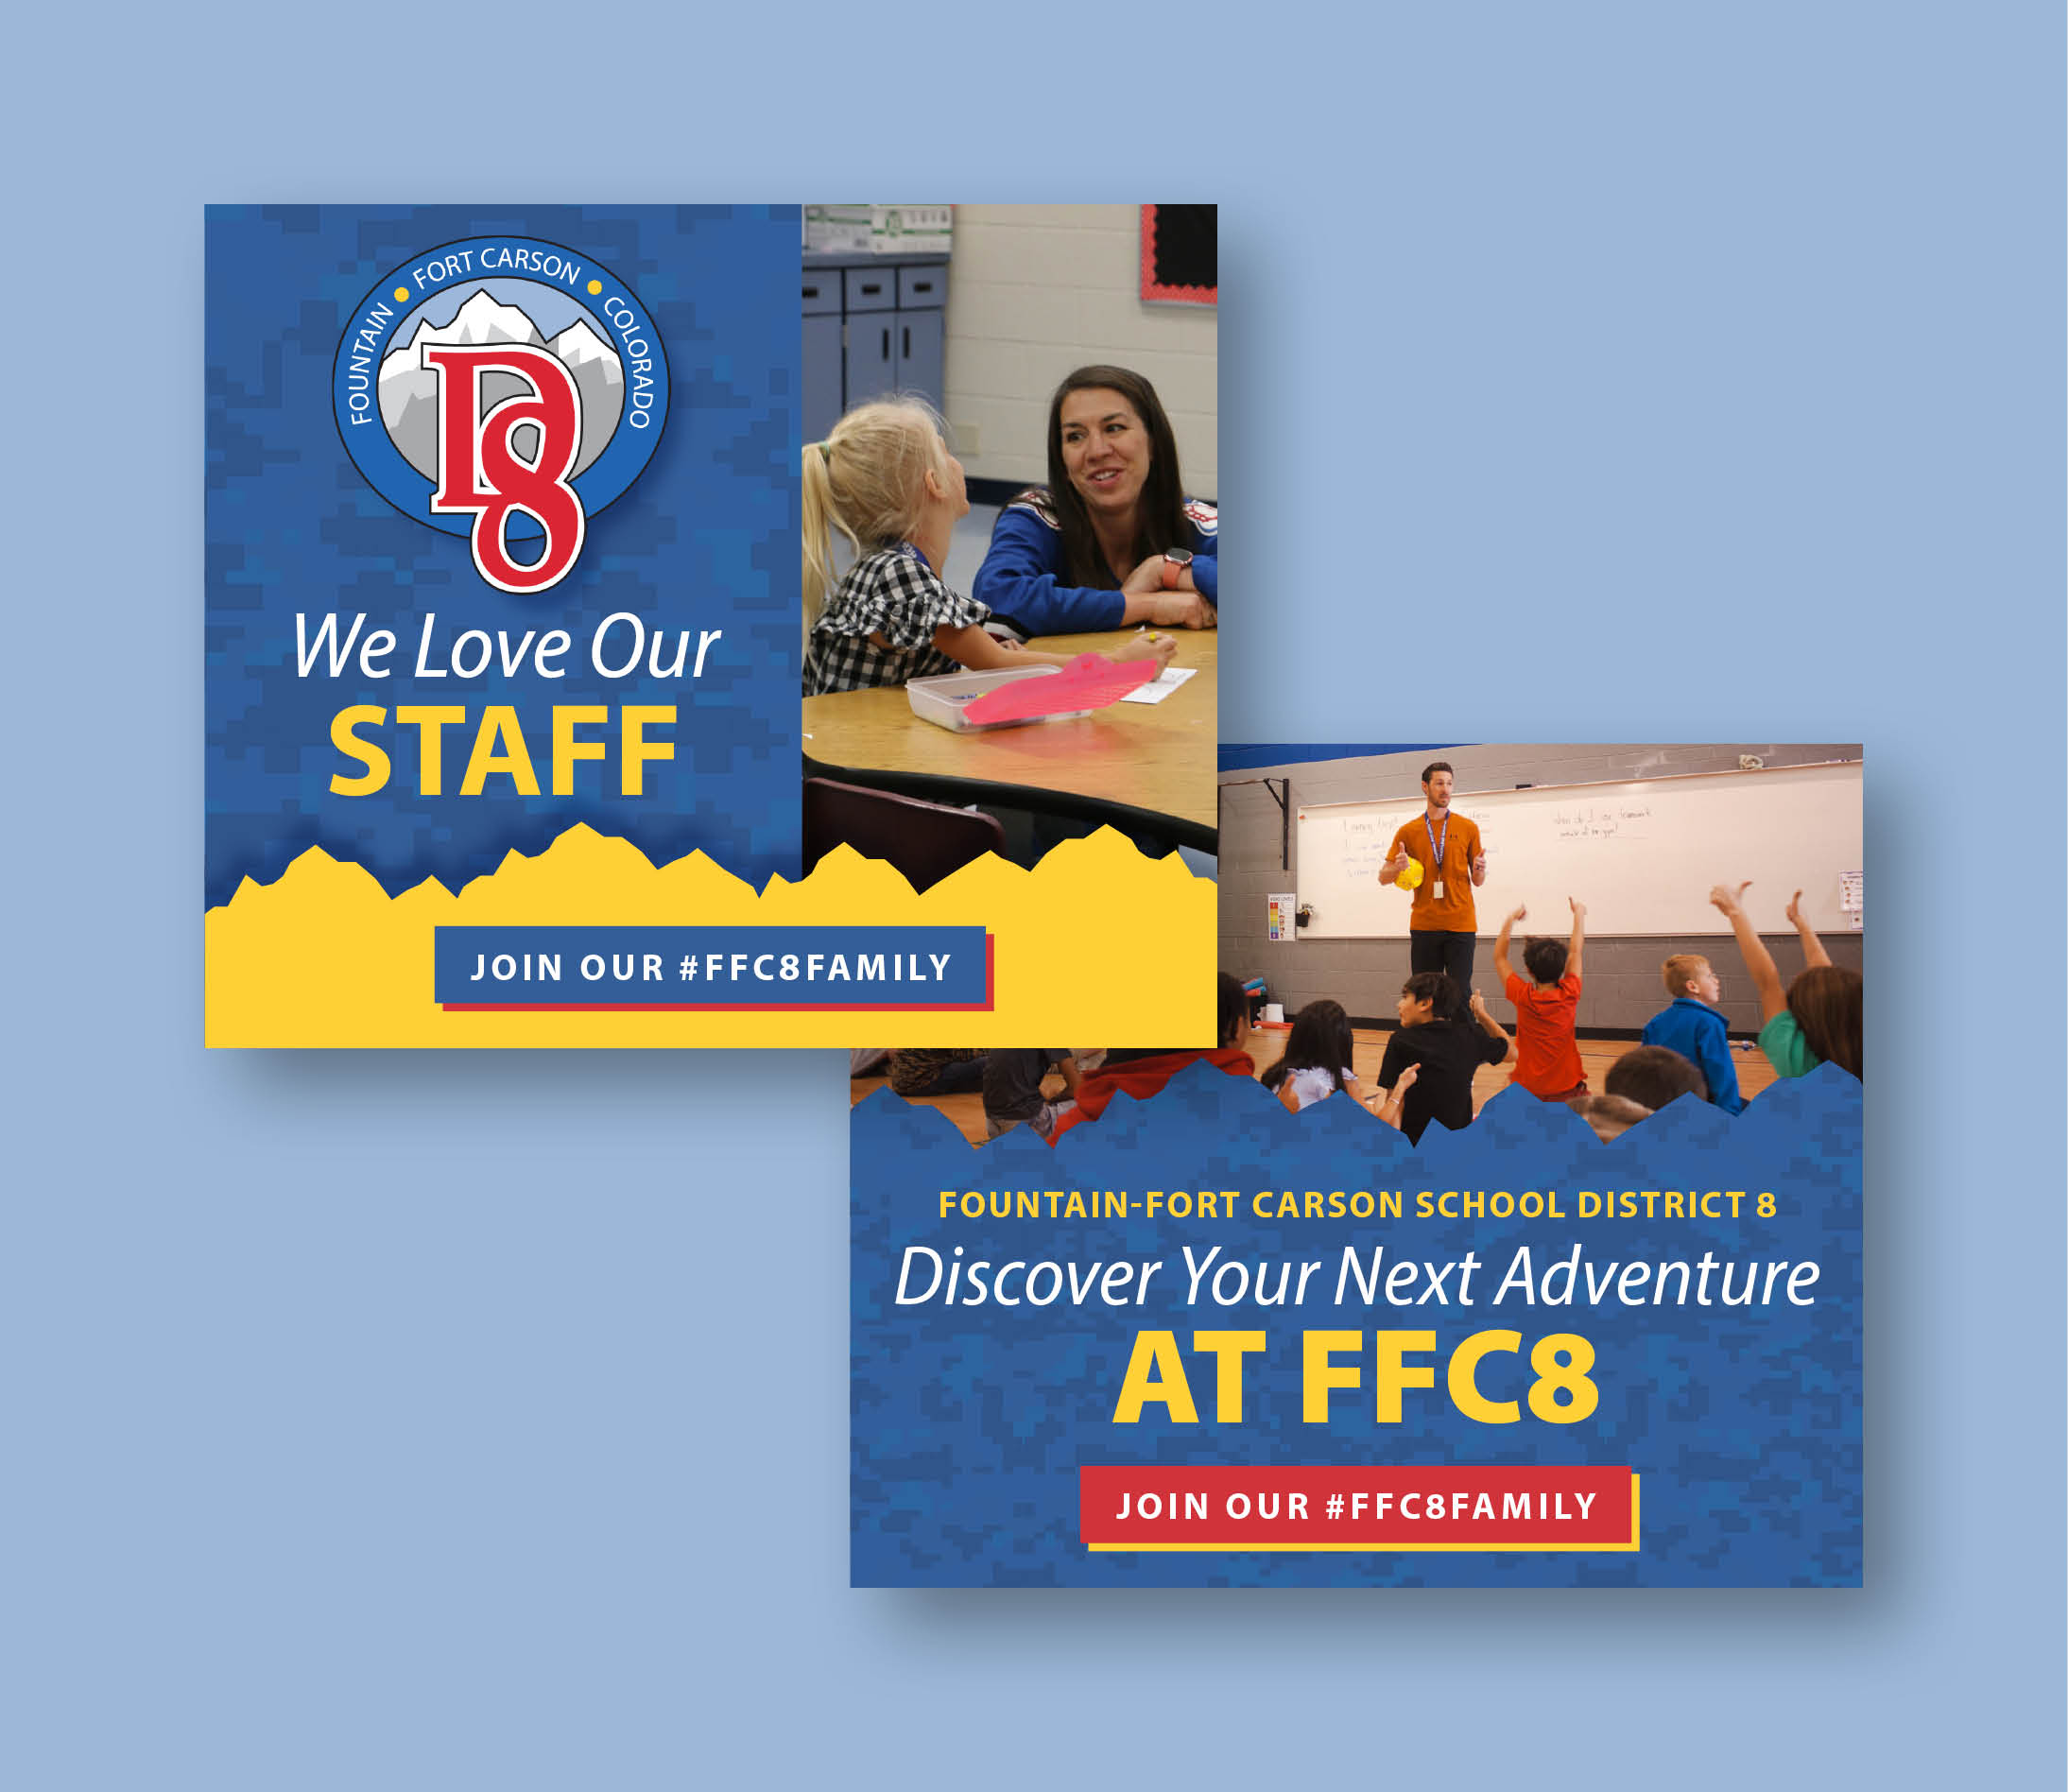 Recruitment postcards for Fountain-Fort Carson School District 8, reading "We love our staff" and "discover your next adventure at FFC8"